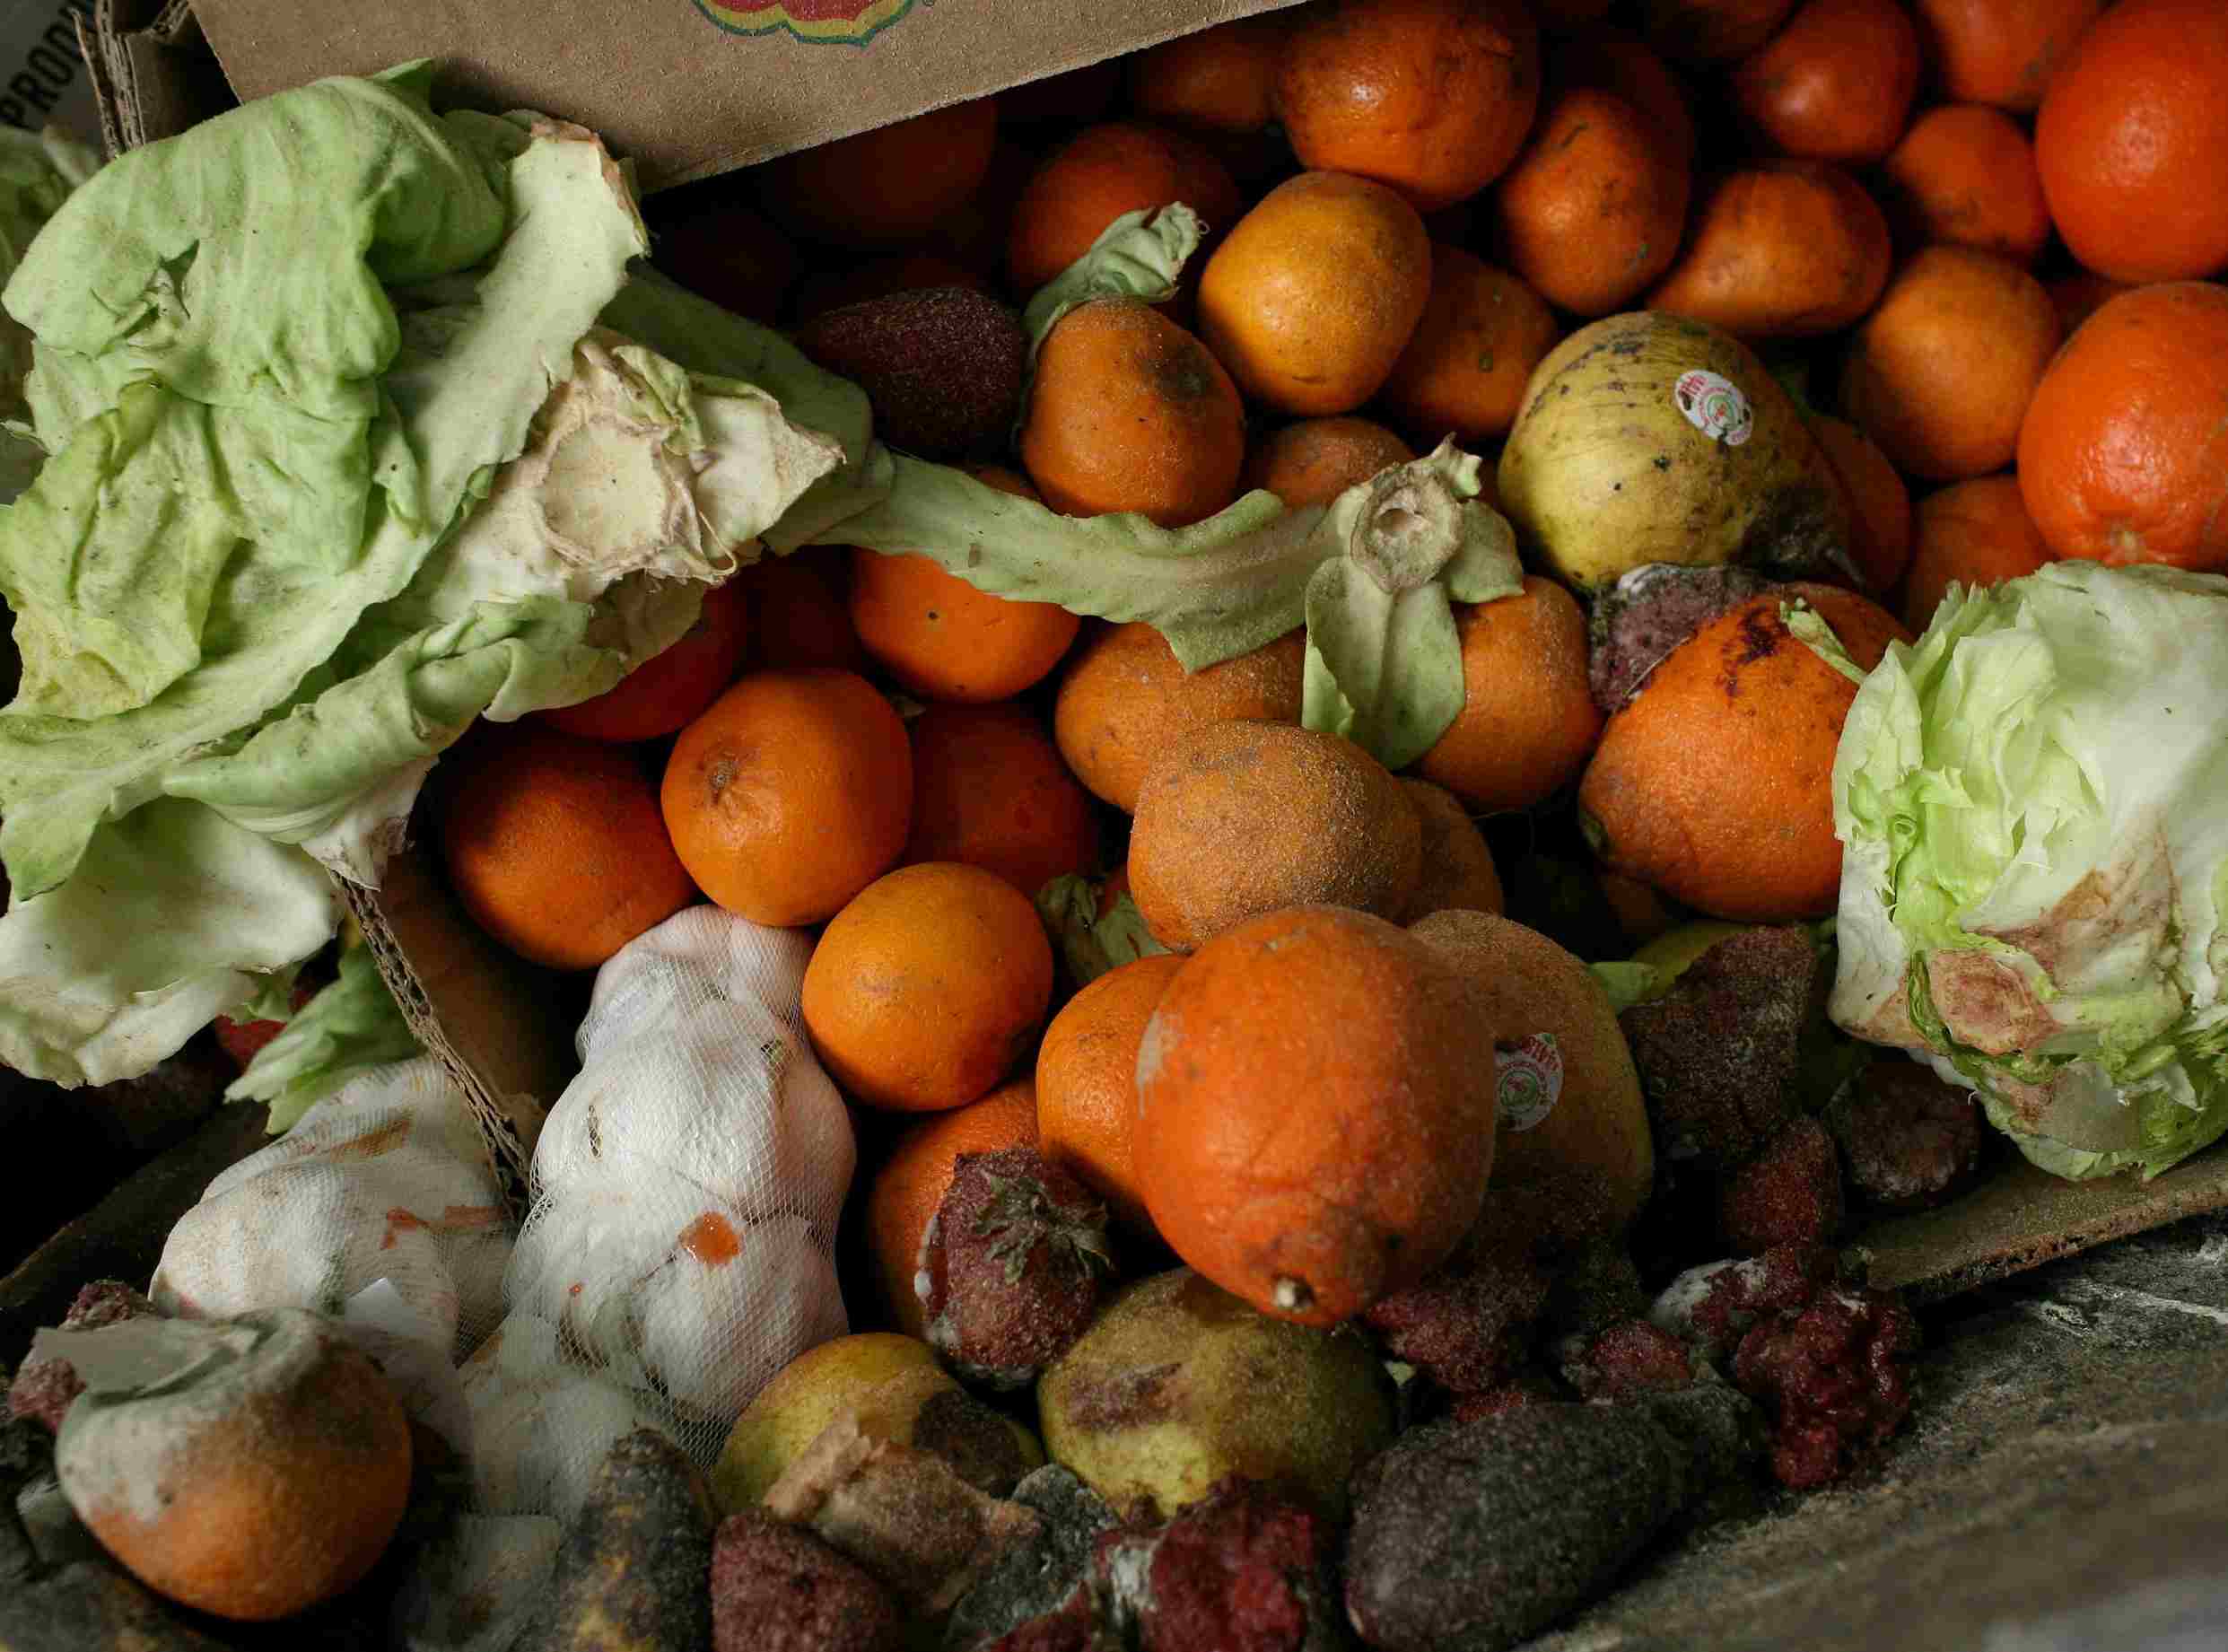 Rotten moldy food, including oranges and lettuce.